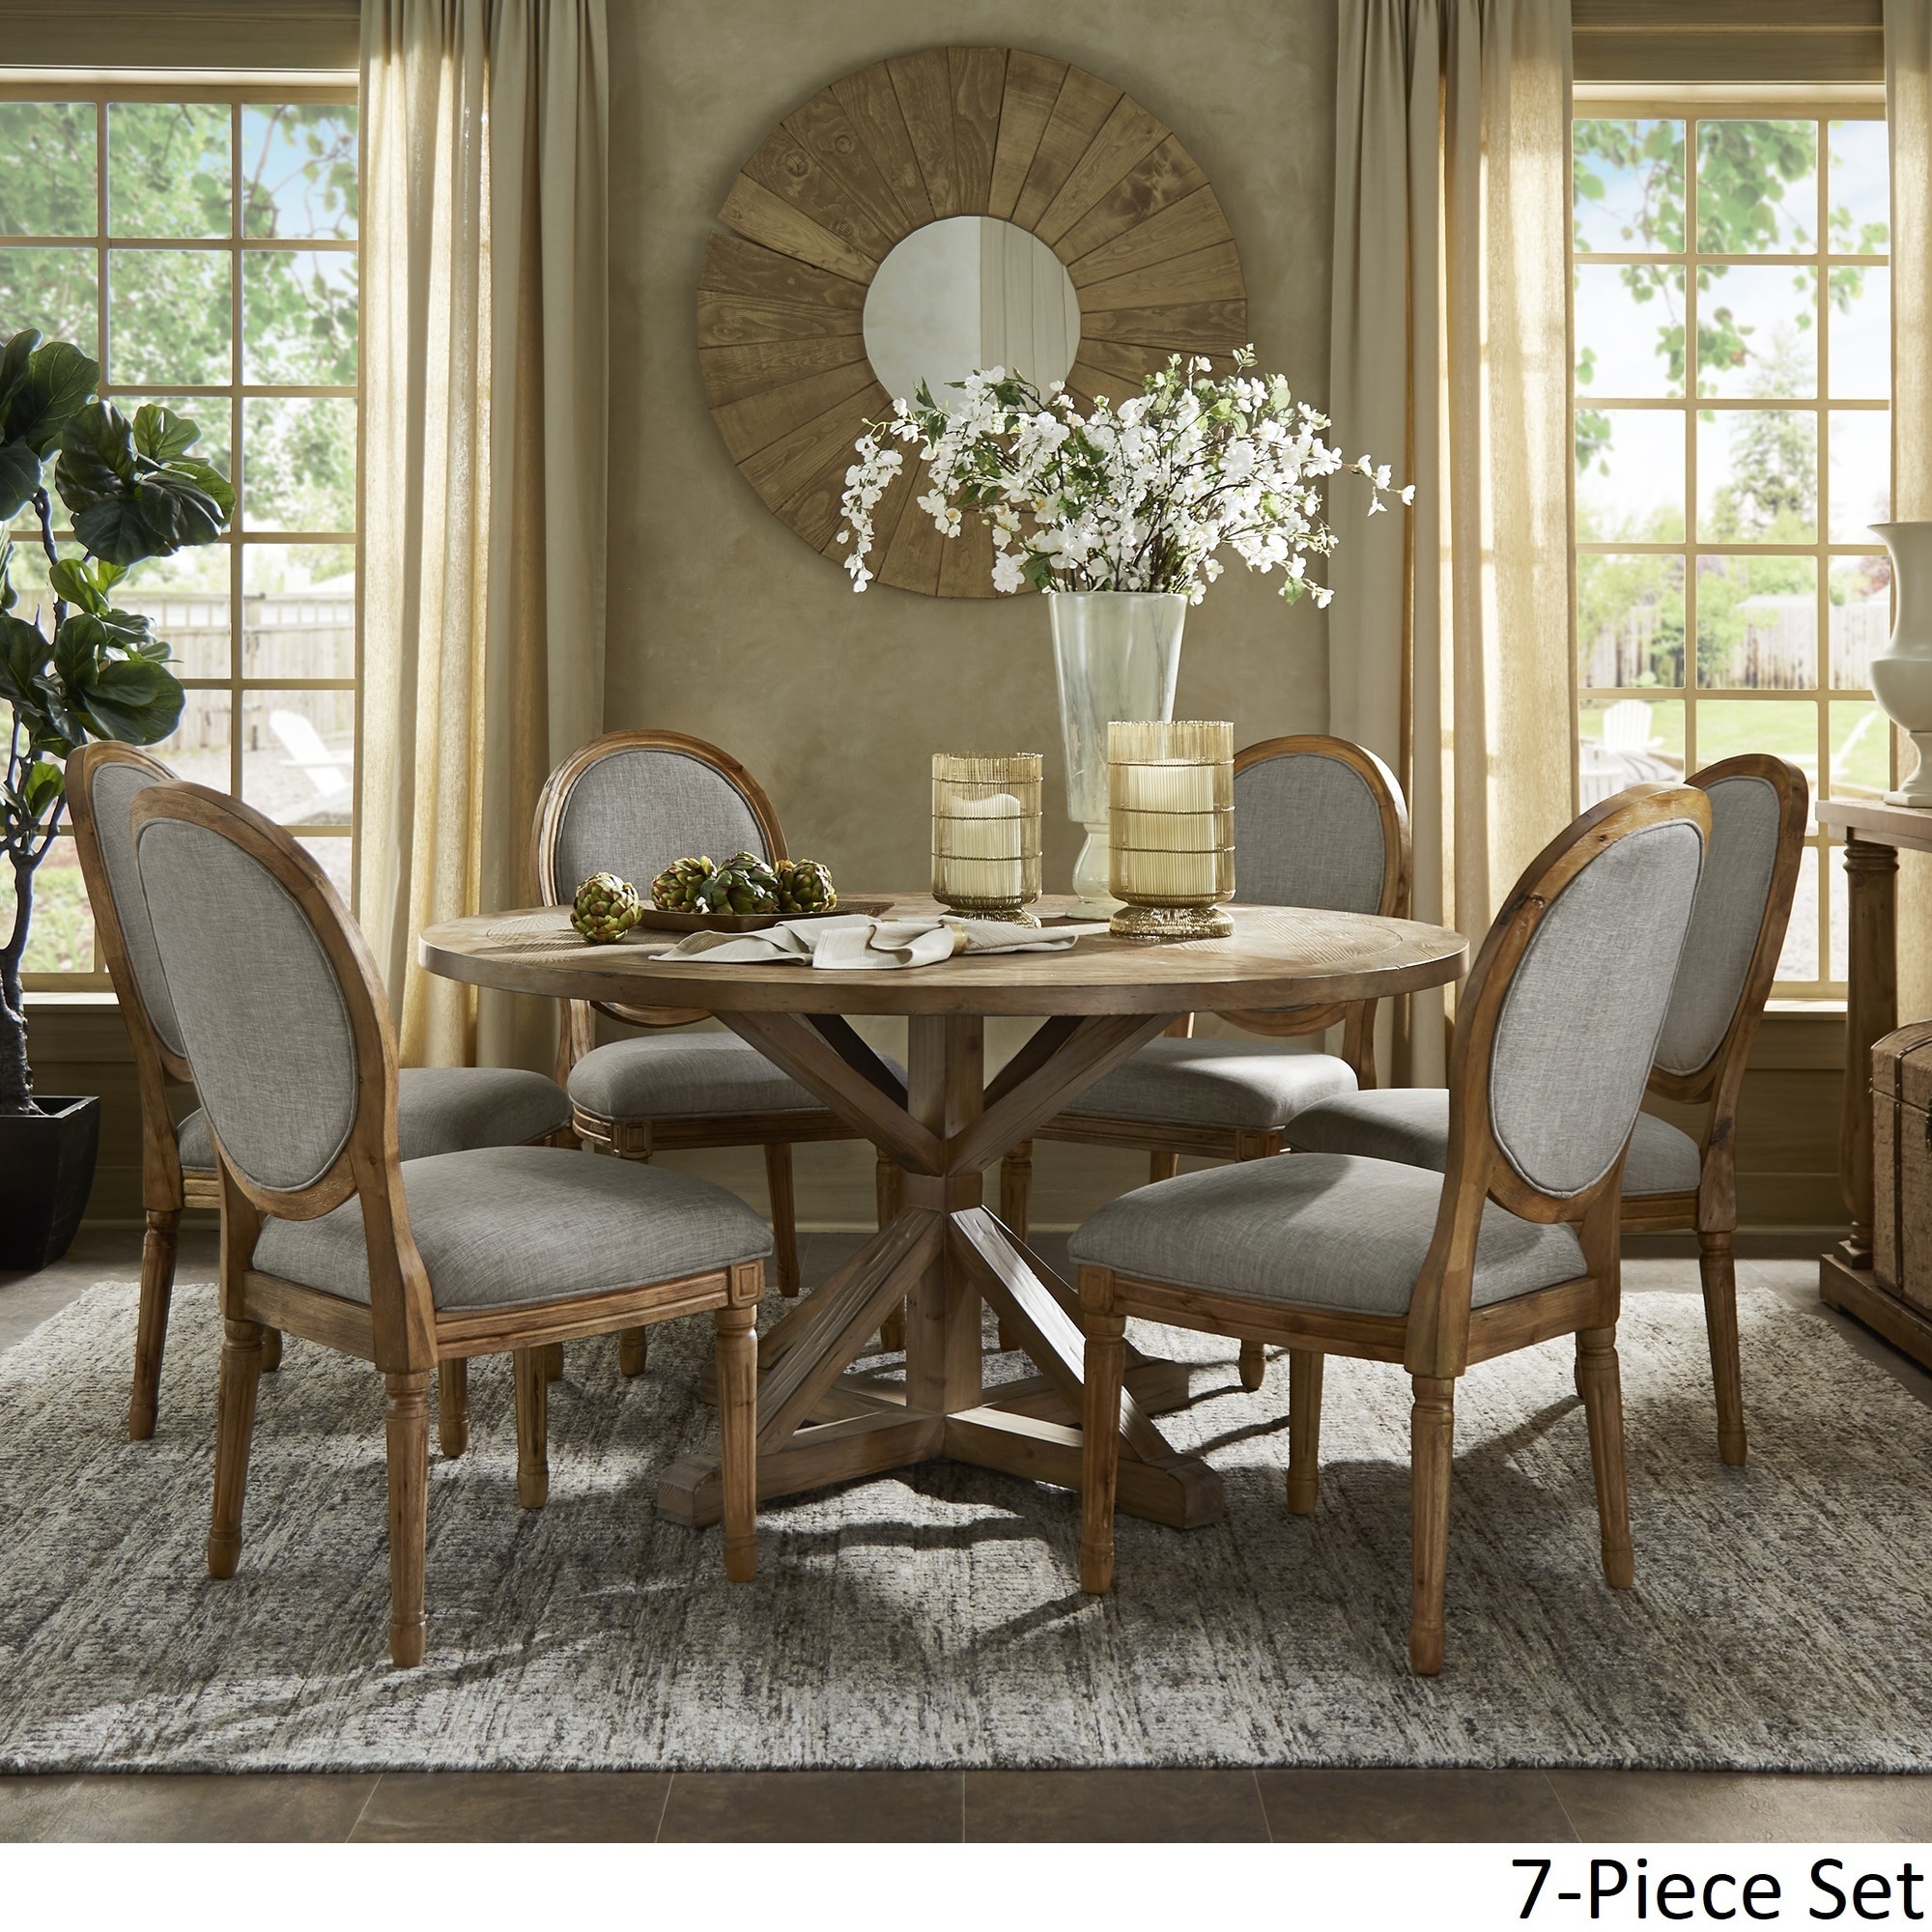 Deana Round Dining Set With Round Back Chairs By INSPIRE Q Artisan 757b28a5 8645 4b17 834d 0e82d3b43da3 